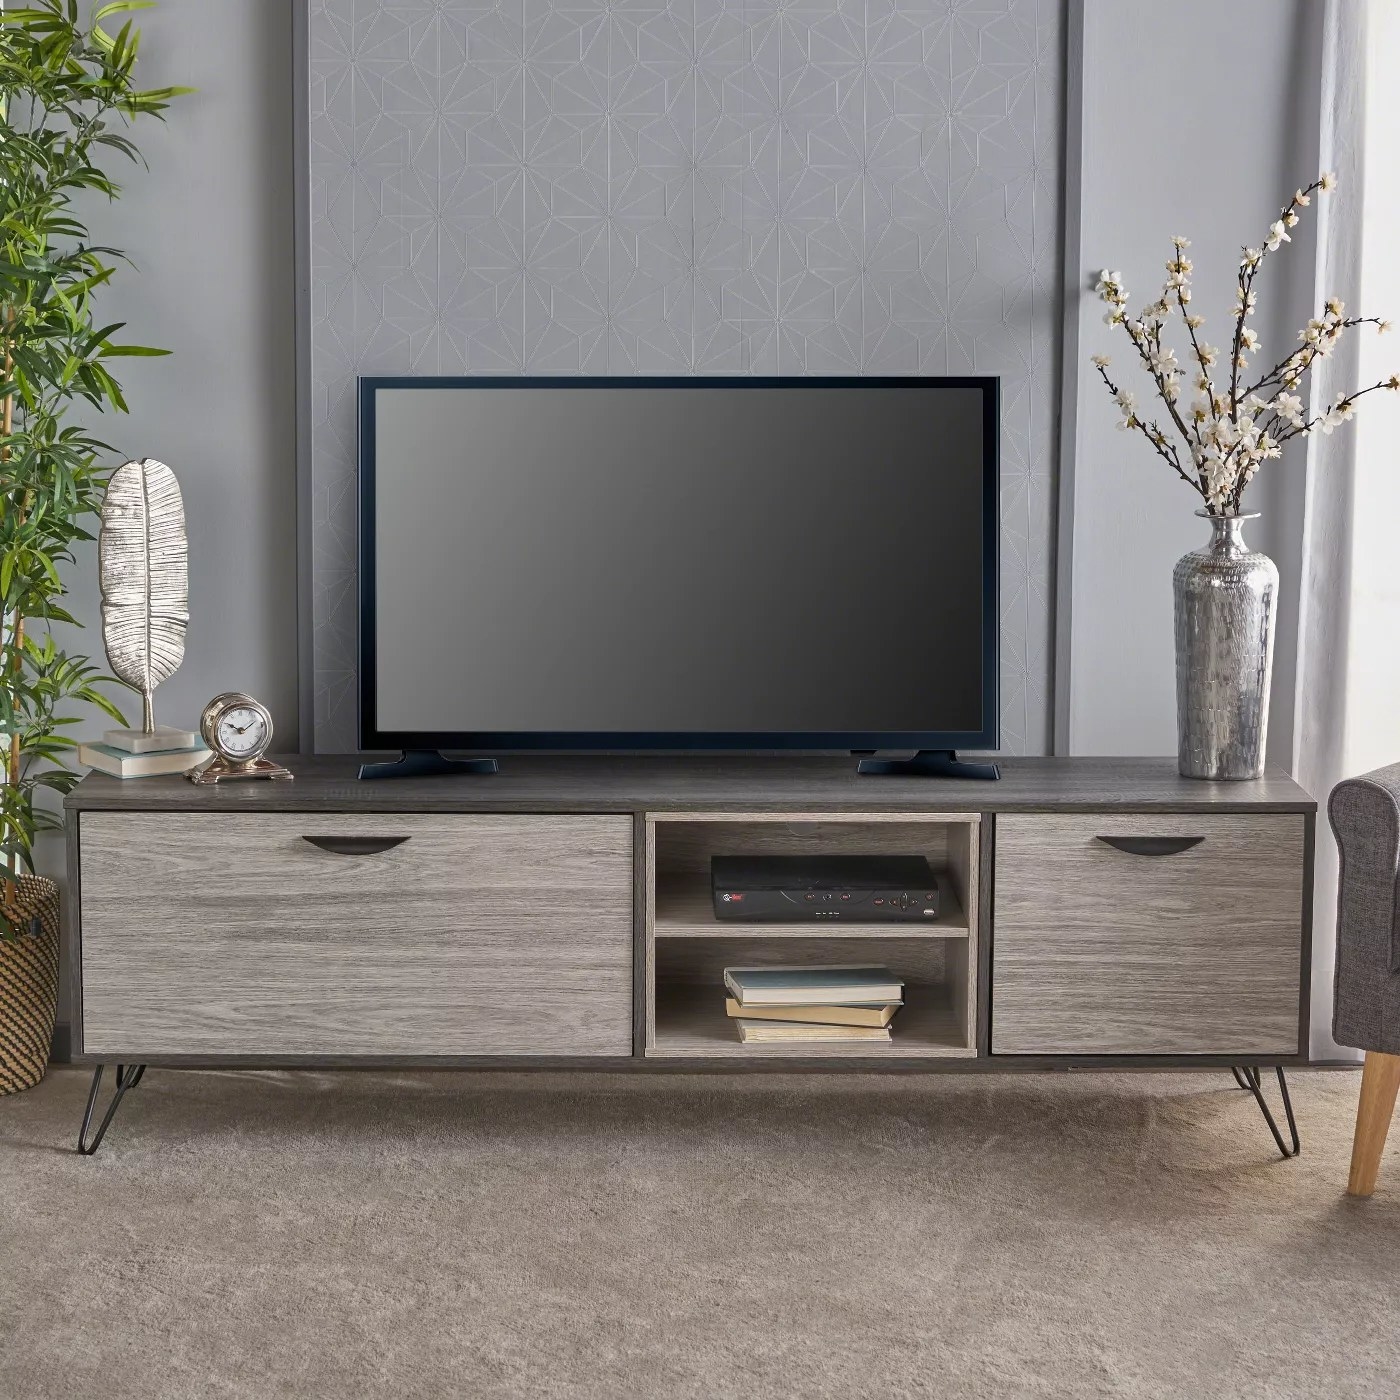 The gray and black mid-century TV stand